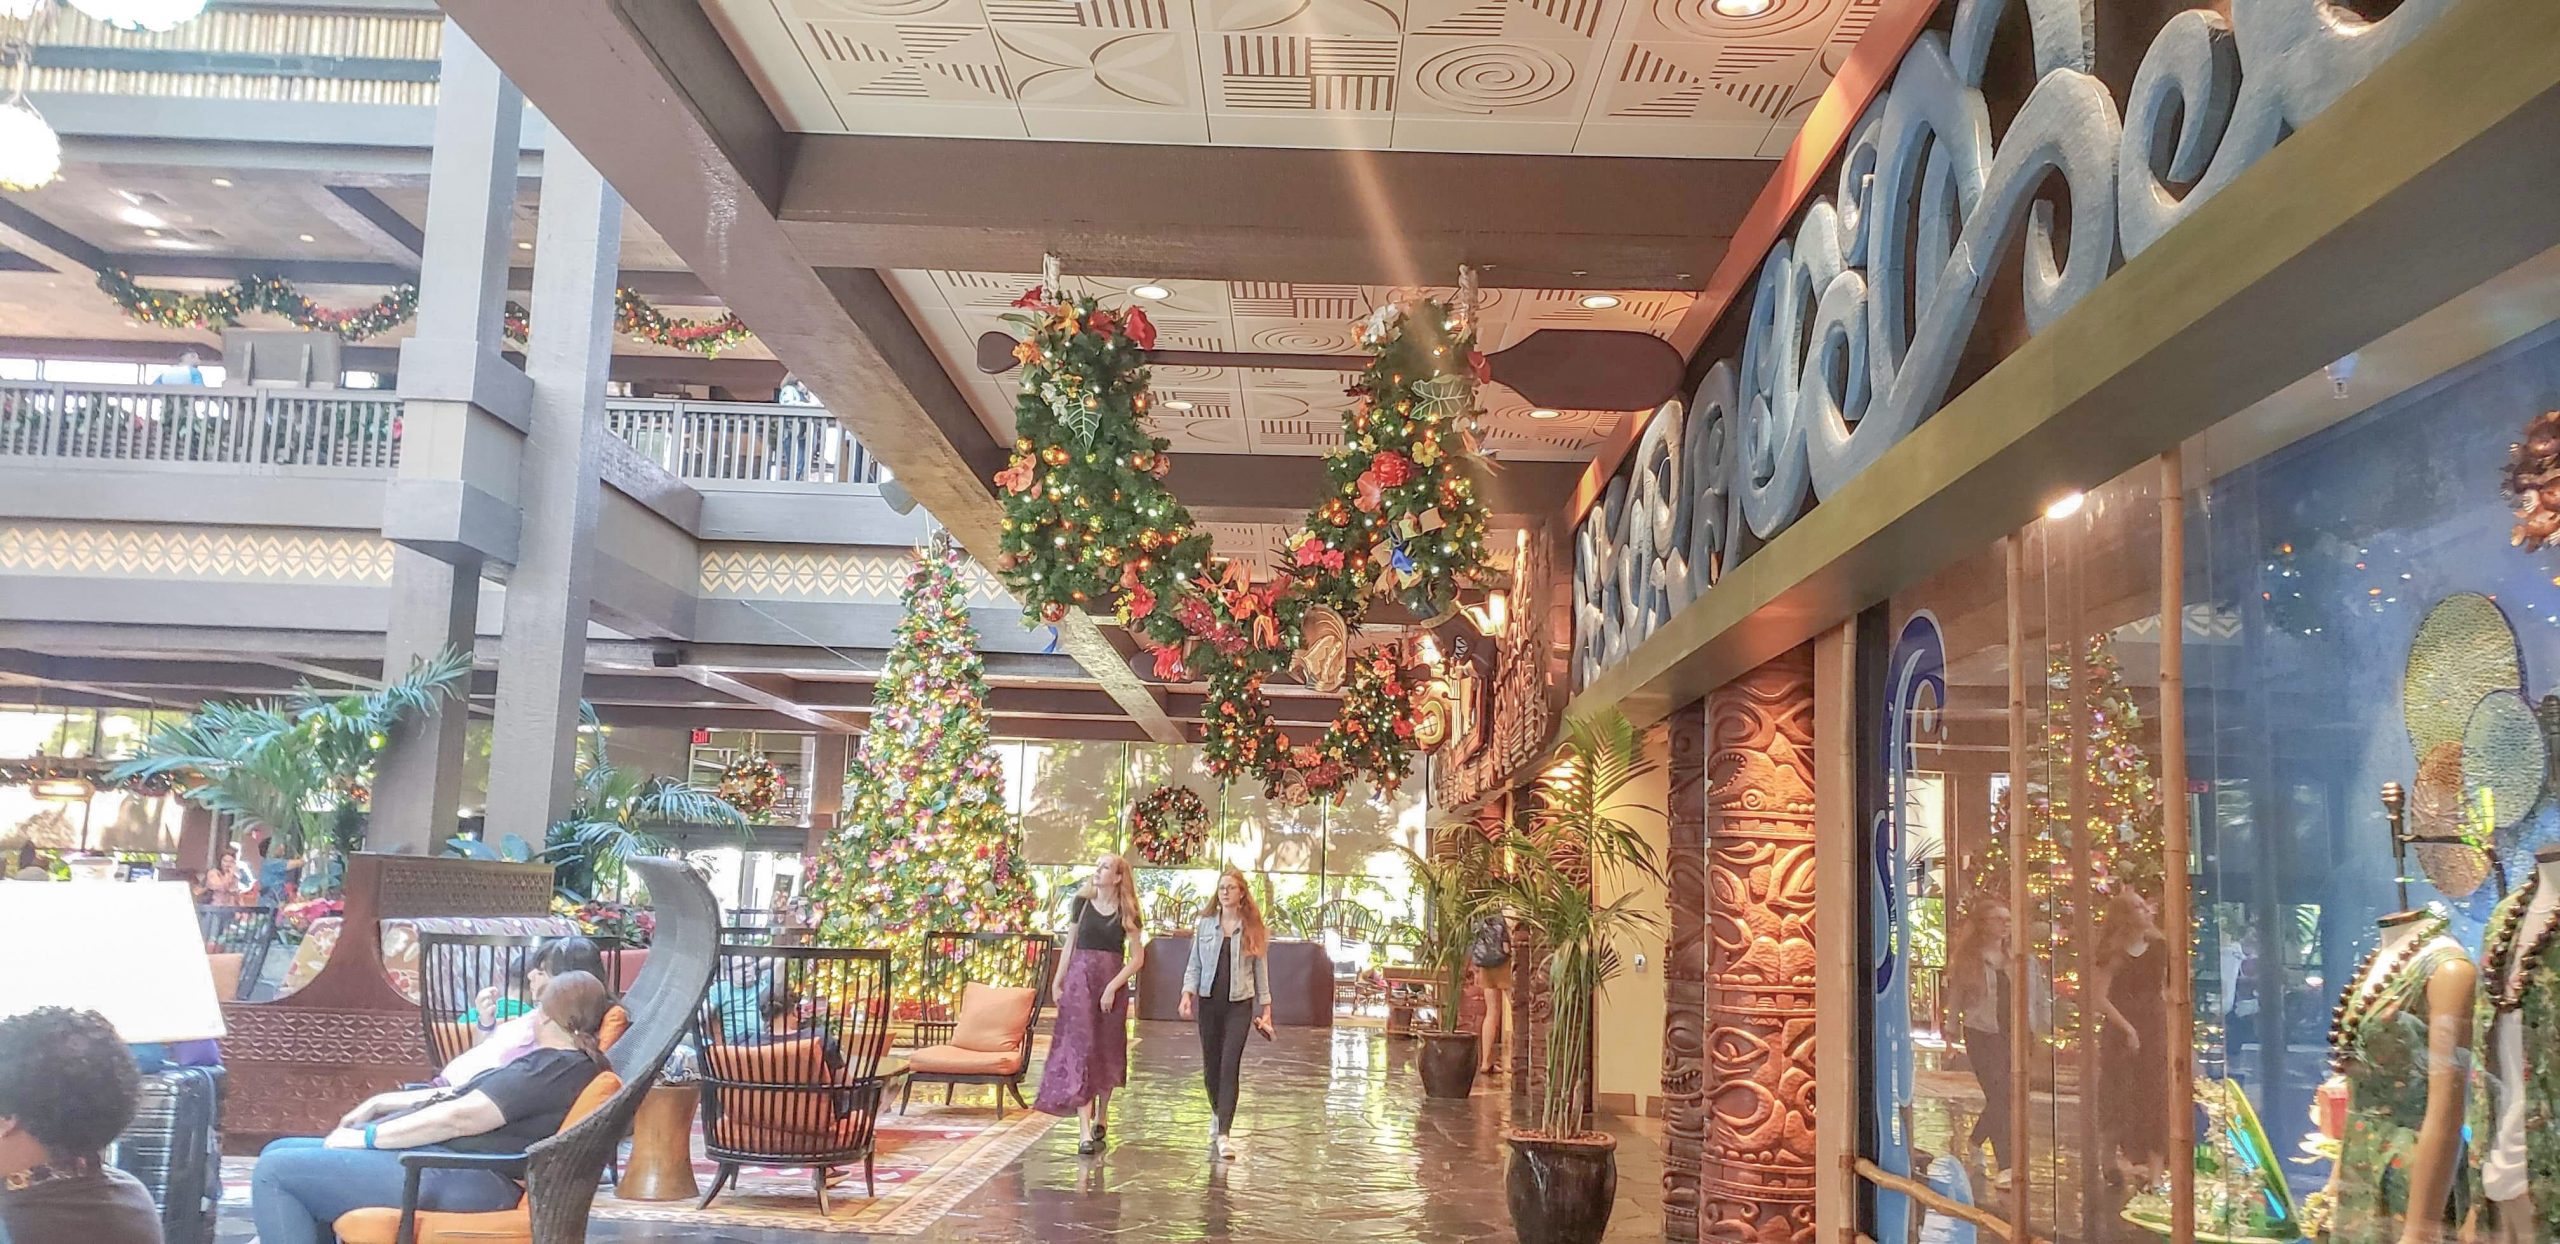 Disney’s Polynesian Resort Finishes Decorating For a Tropical Christmas